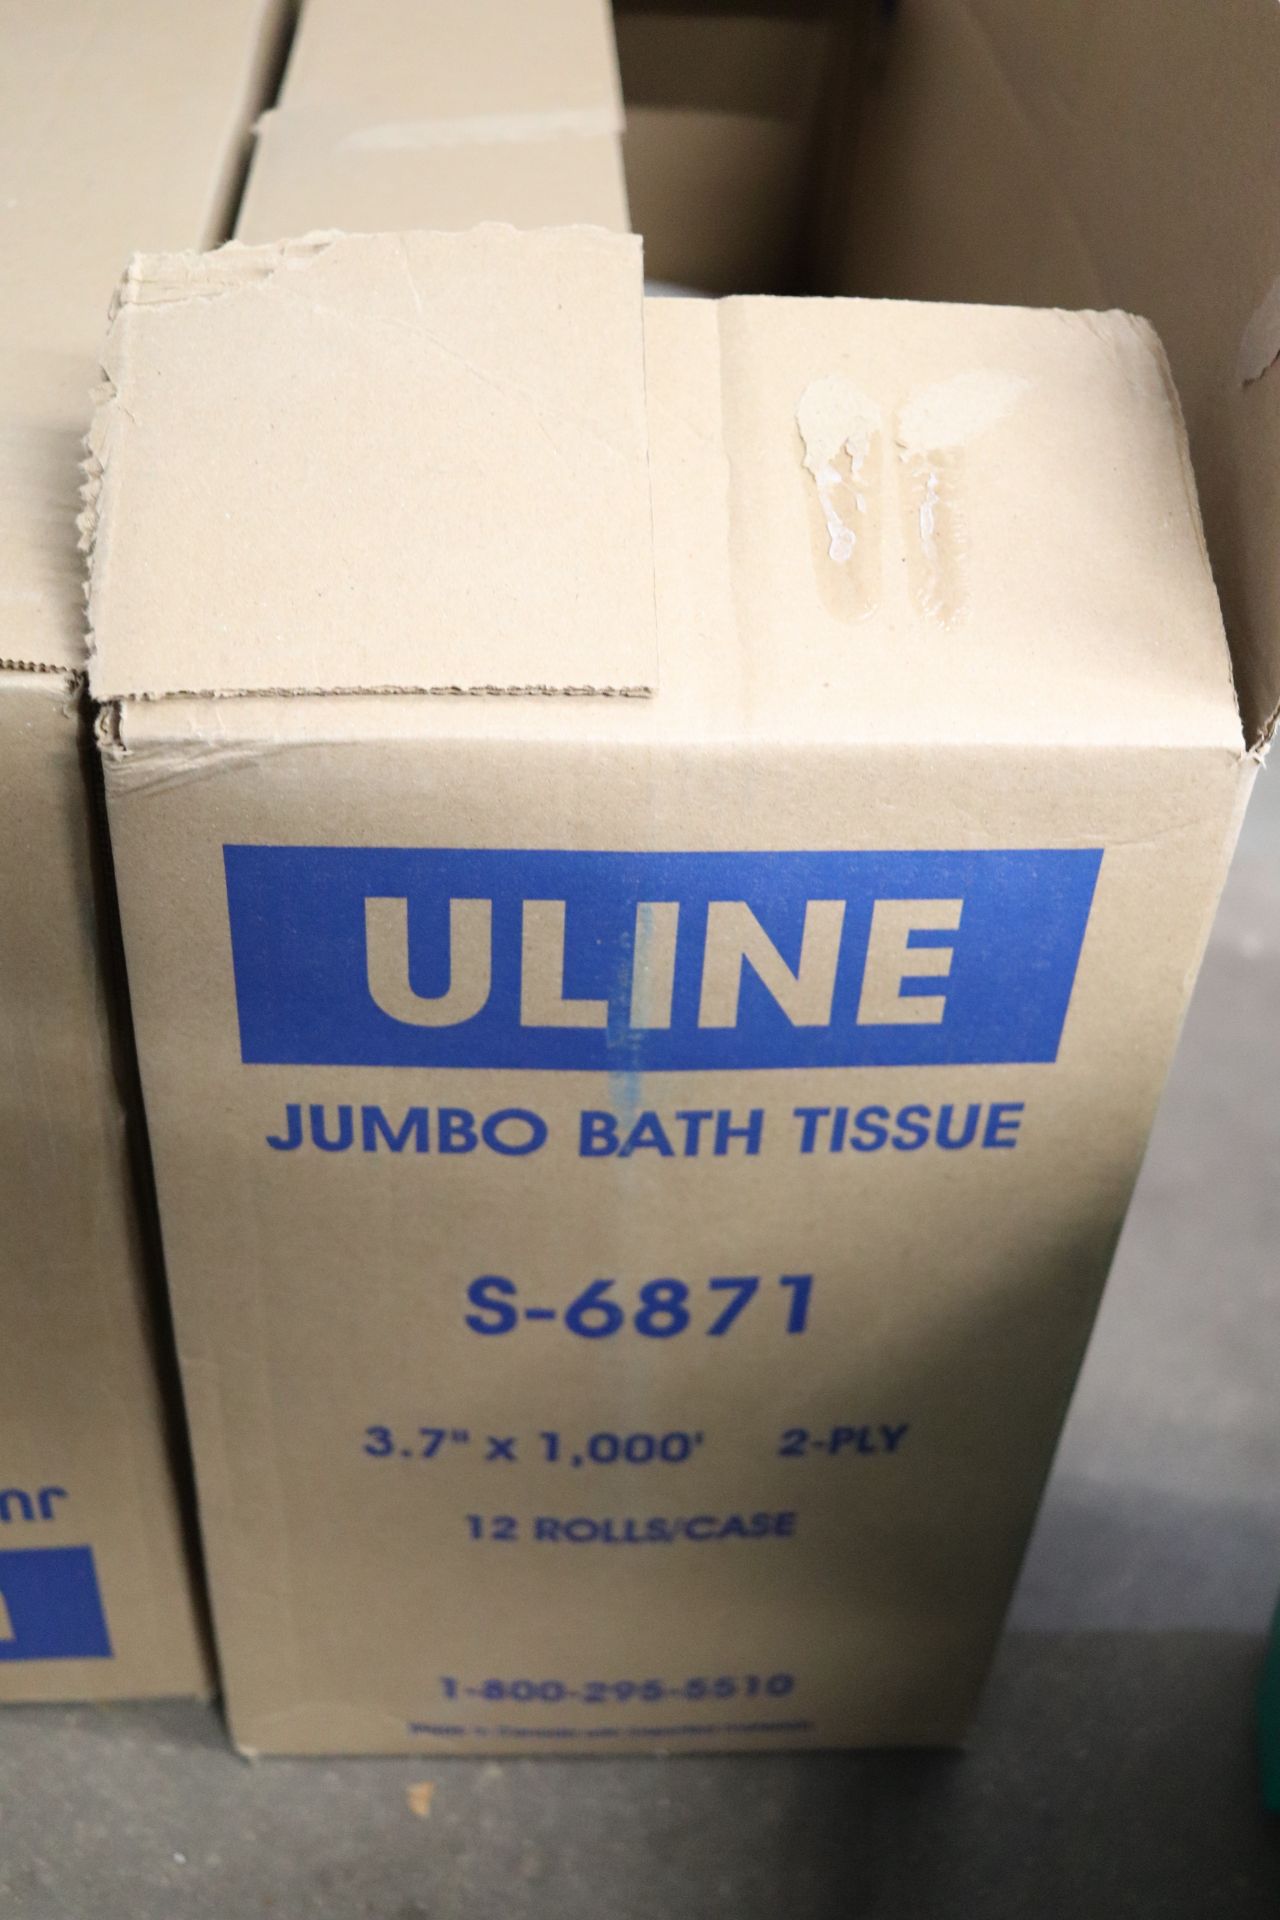 Two and a half cases of Uline jumbo bath tissue, S6871 - Image 2 of 2